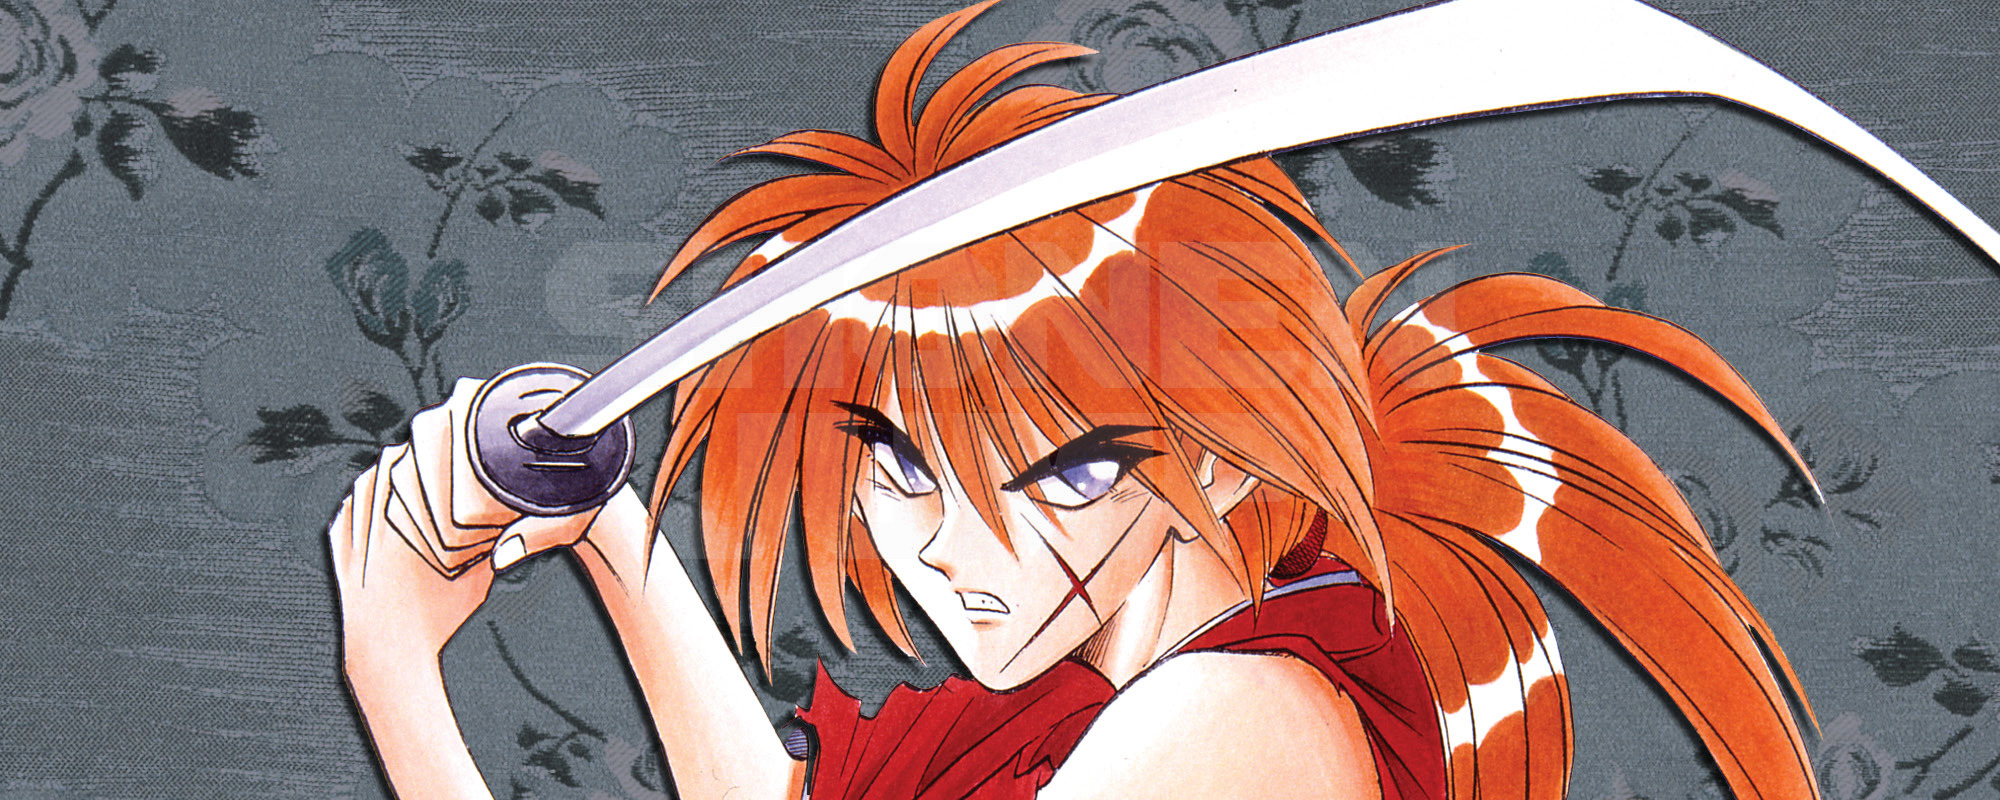 Rurouni Kenshin' Has a New Spinoff Series | All About Japan